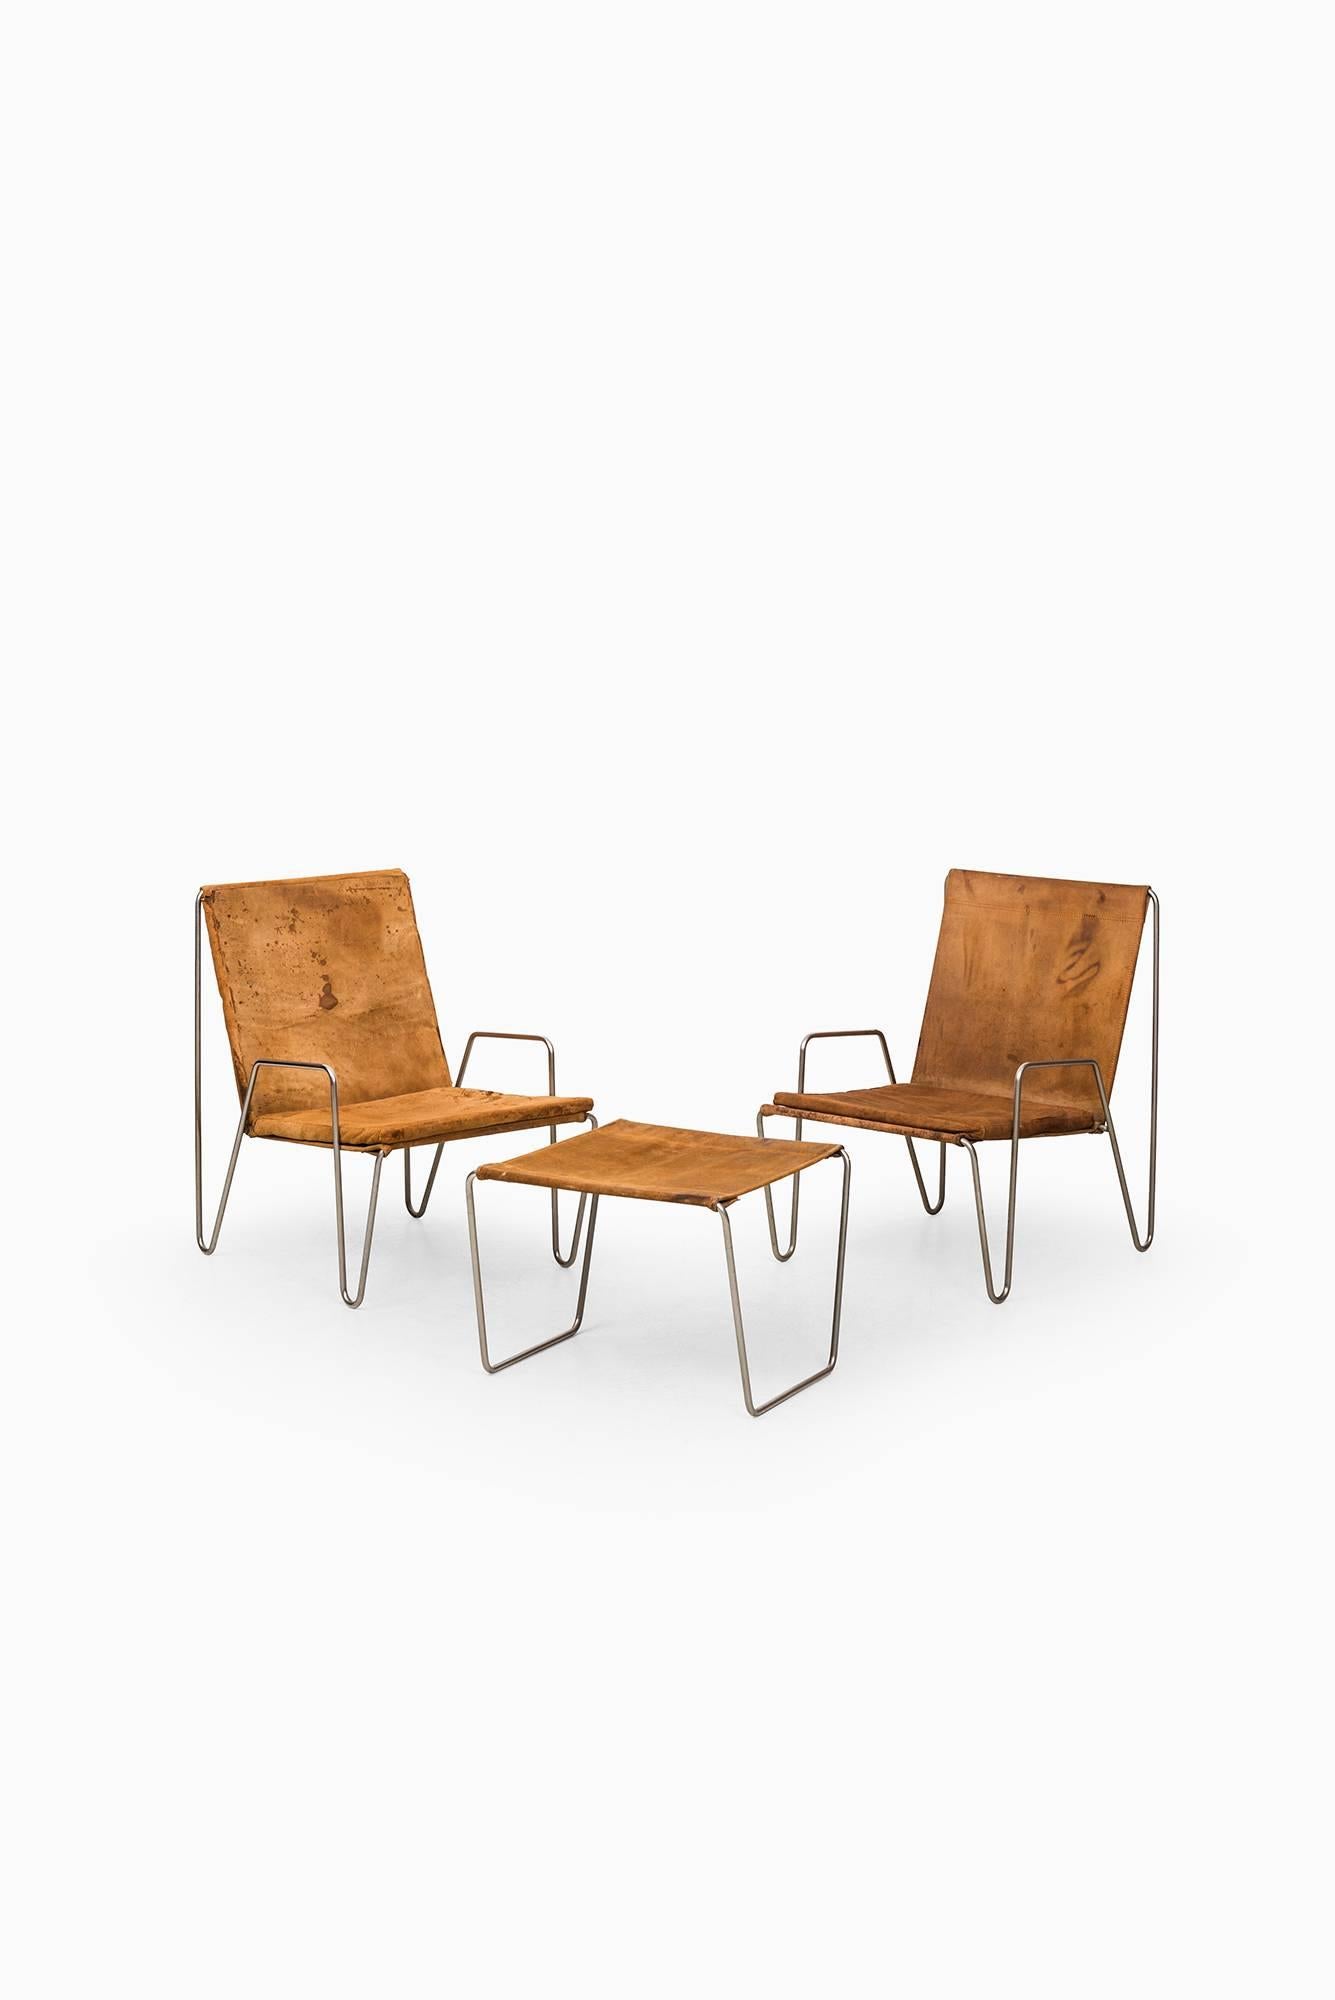 Danish Verner Panton Easy Chairs with Stool Model Bachelor by Fritz Hansen in Denmark For Sale